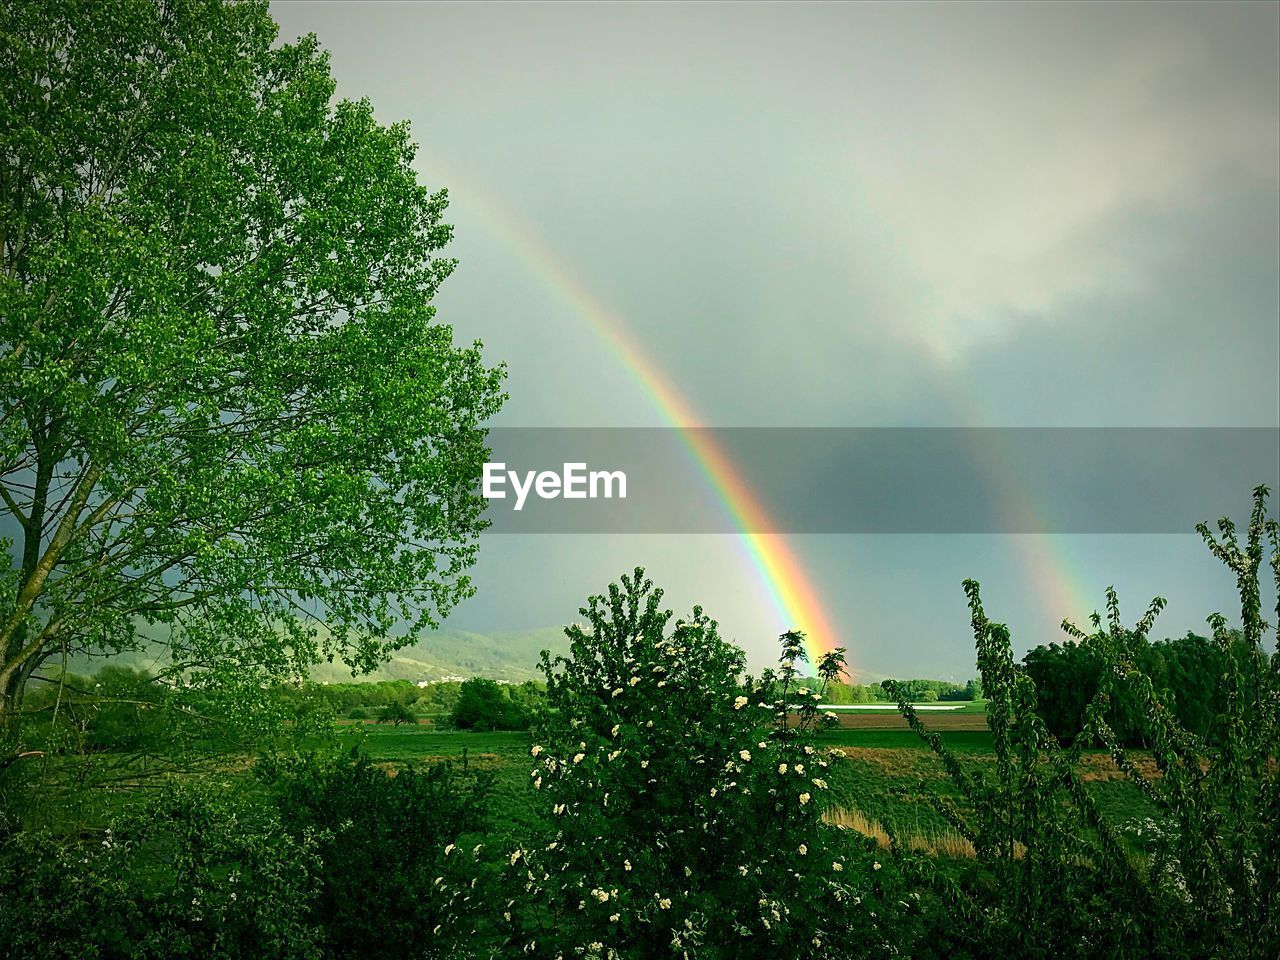 SCENIC VIEW OF RAINBOW OVER TREES AND SKY